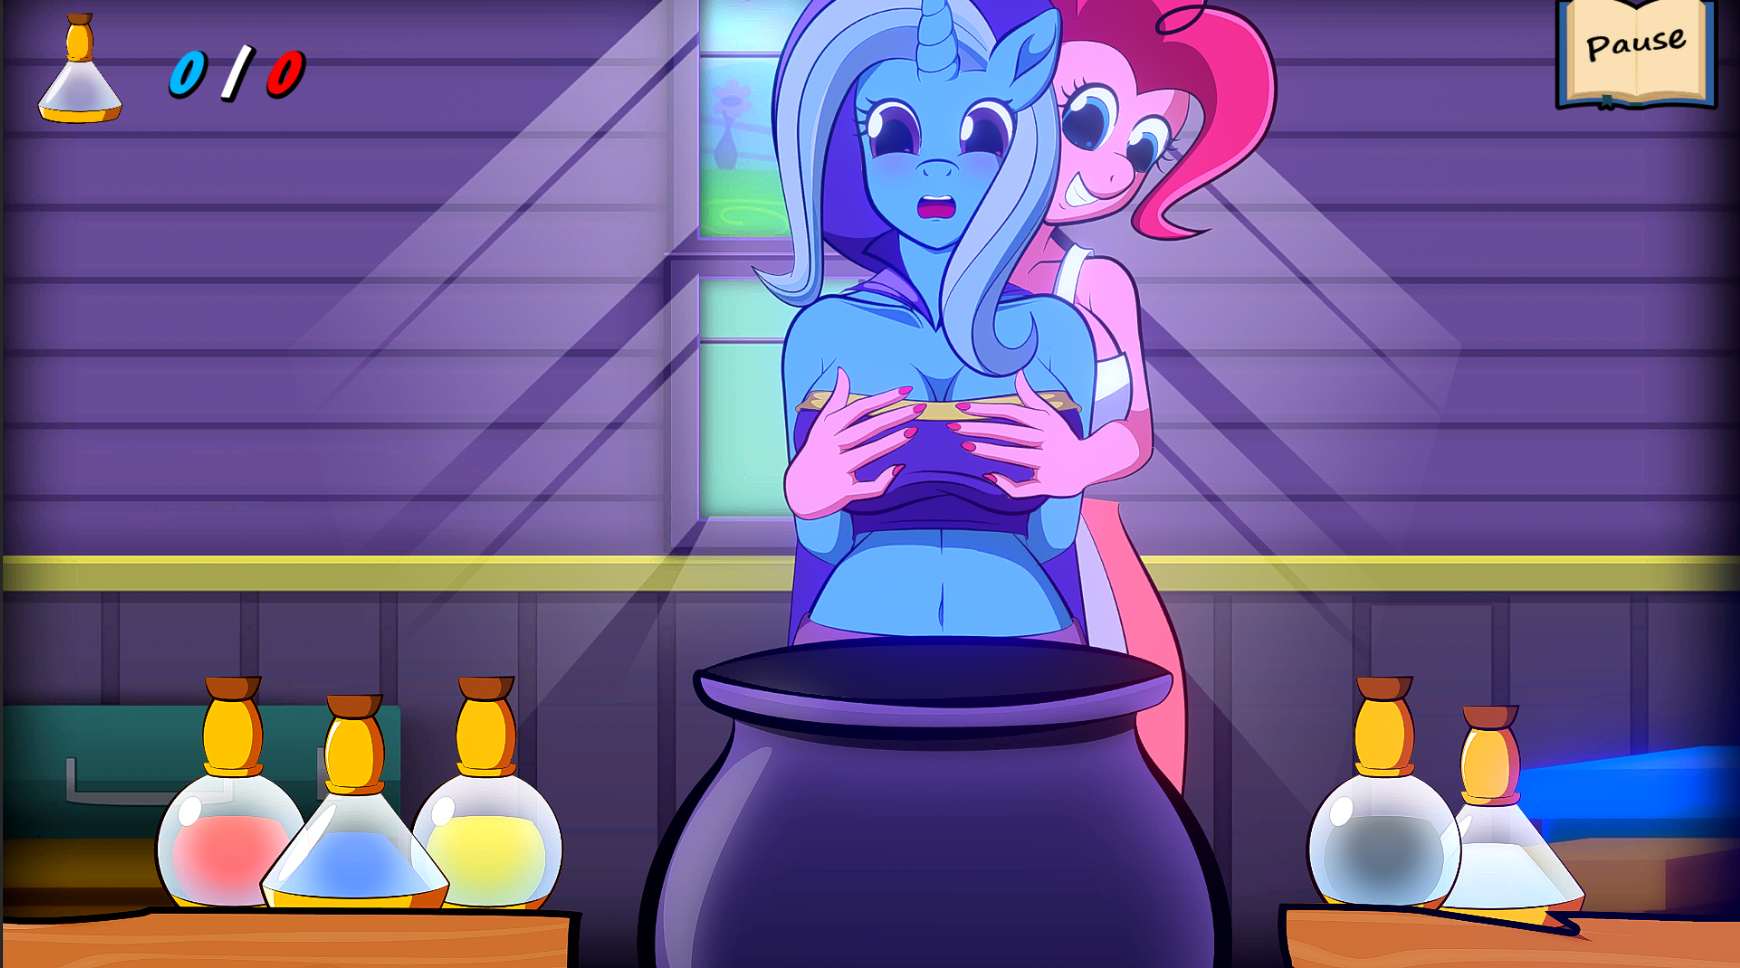 Cooking With Pinkie Pie 2 v0.0.1.5 - free game download, reviews, mega -  xGames